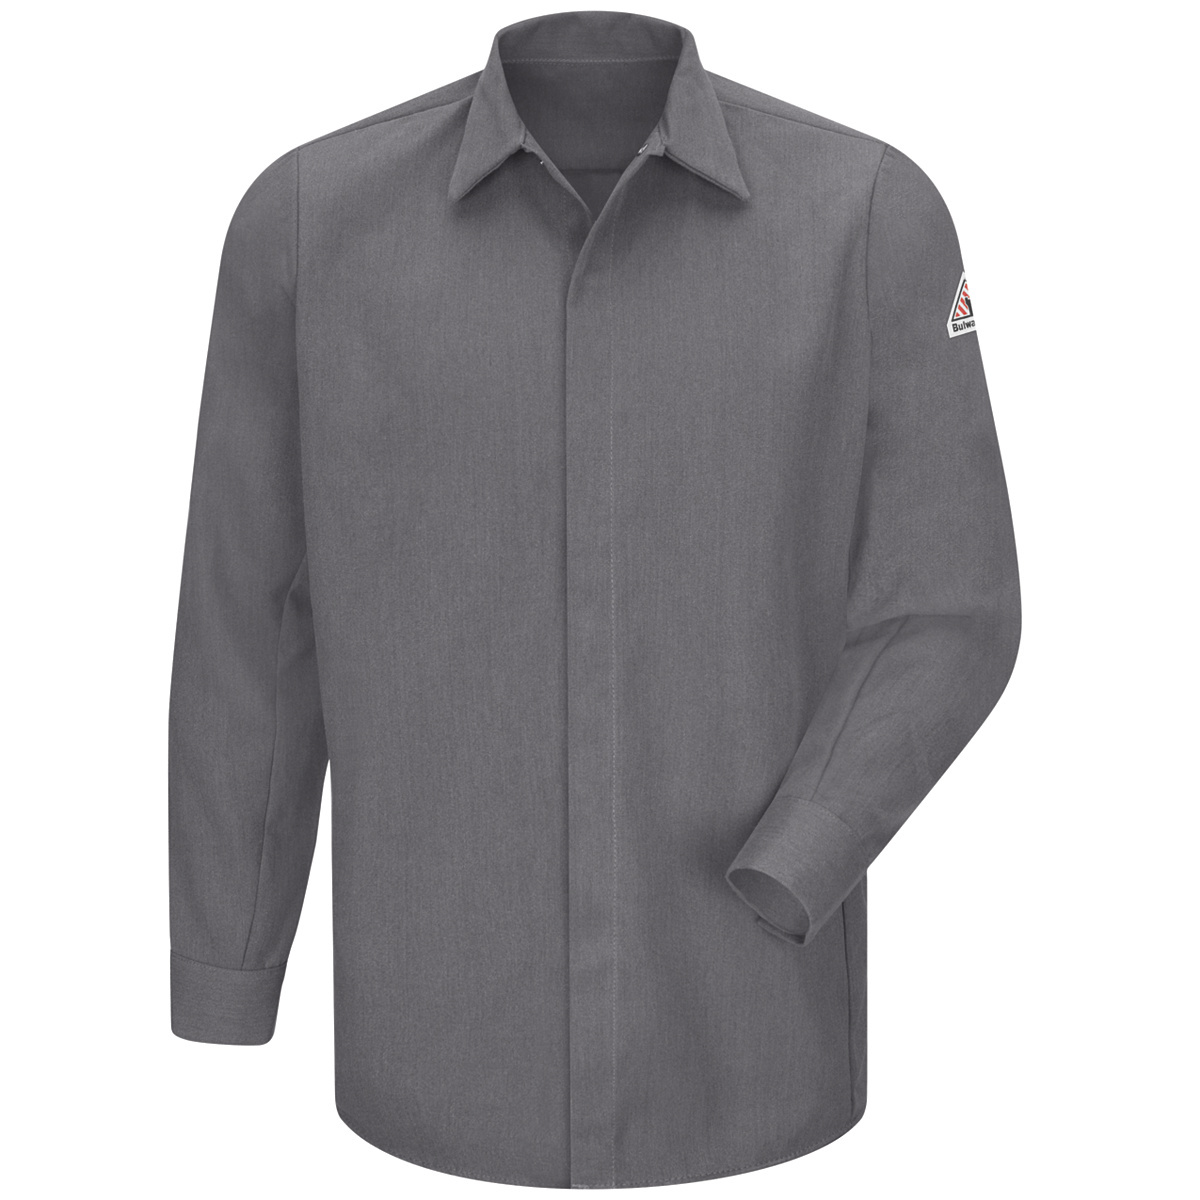 Bulwark® 2X Tall Gray CoolTouch®/Modacrylic/Lyocell/Aramid Flame Resistant Work Shirt With Gripper Front Closure